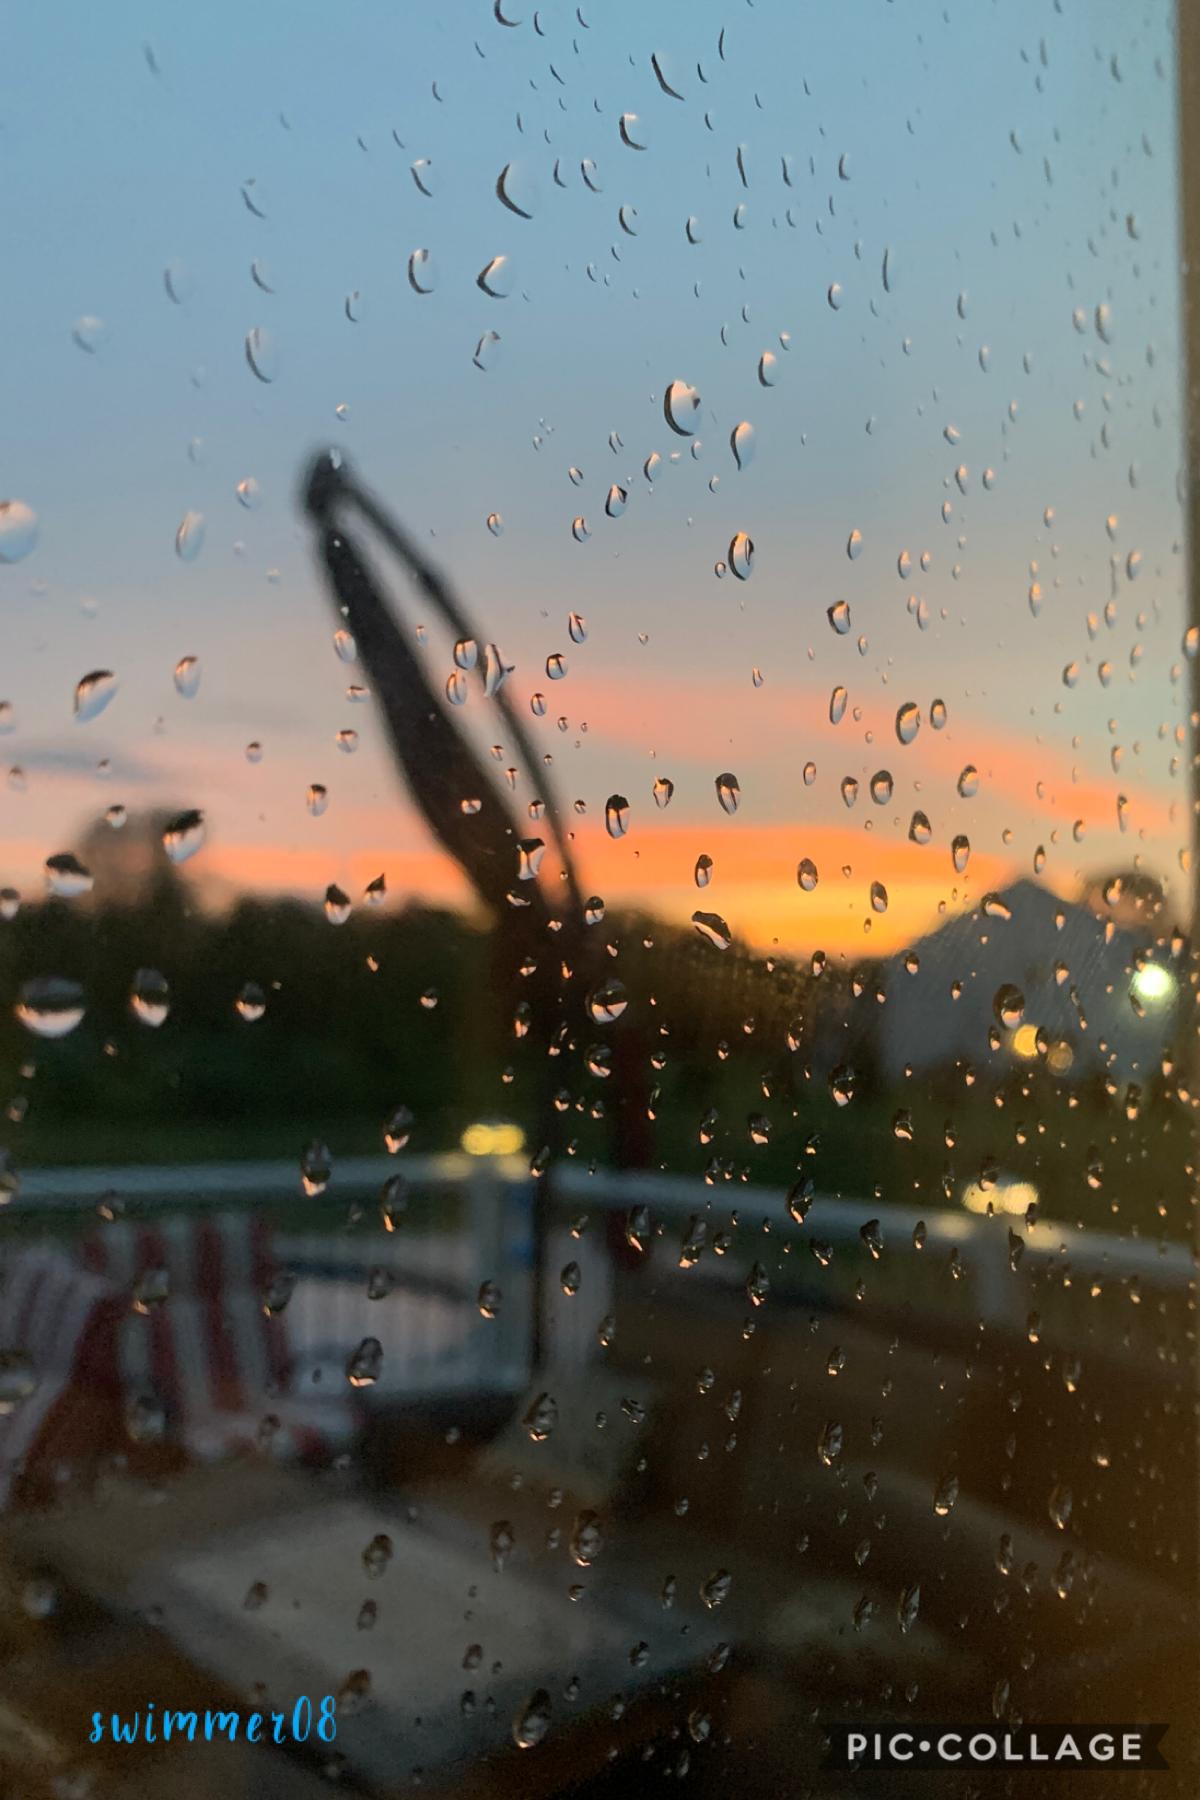 took this pic after a storm we had yesterday. sry it’s been a while since i posted. my fav part of this pic is the water droplets on the window. 💧